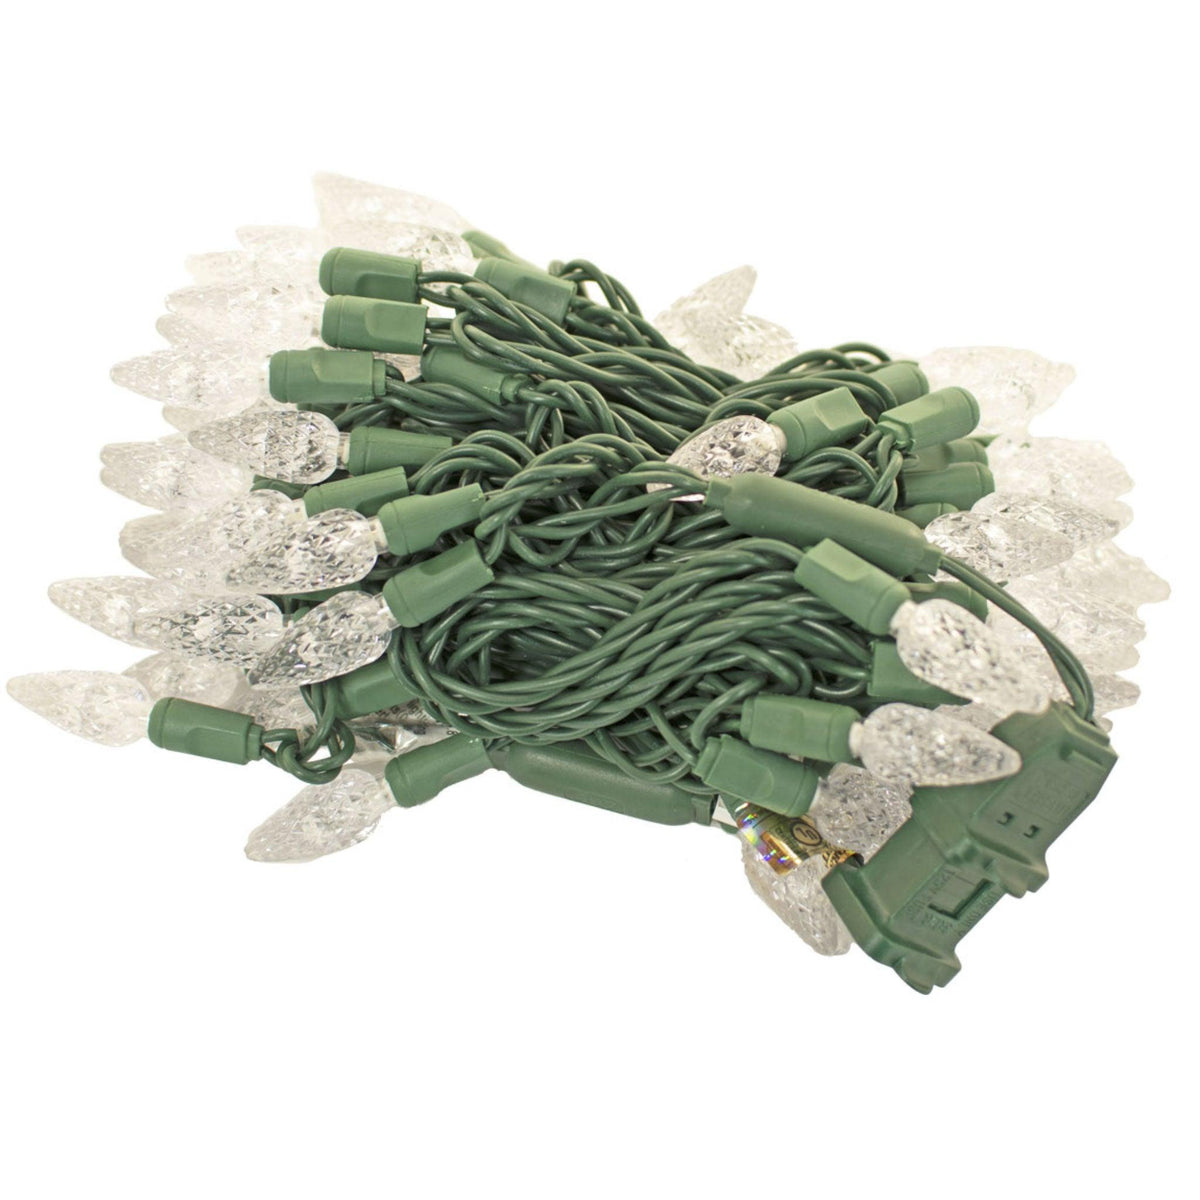 Purchase a brand new 70 Light set of Lee Display's C6 LED Clear Warm White Christmas String Lights with Green Wire.  Energy-efficient lighting for outdoor use